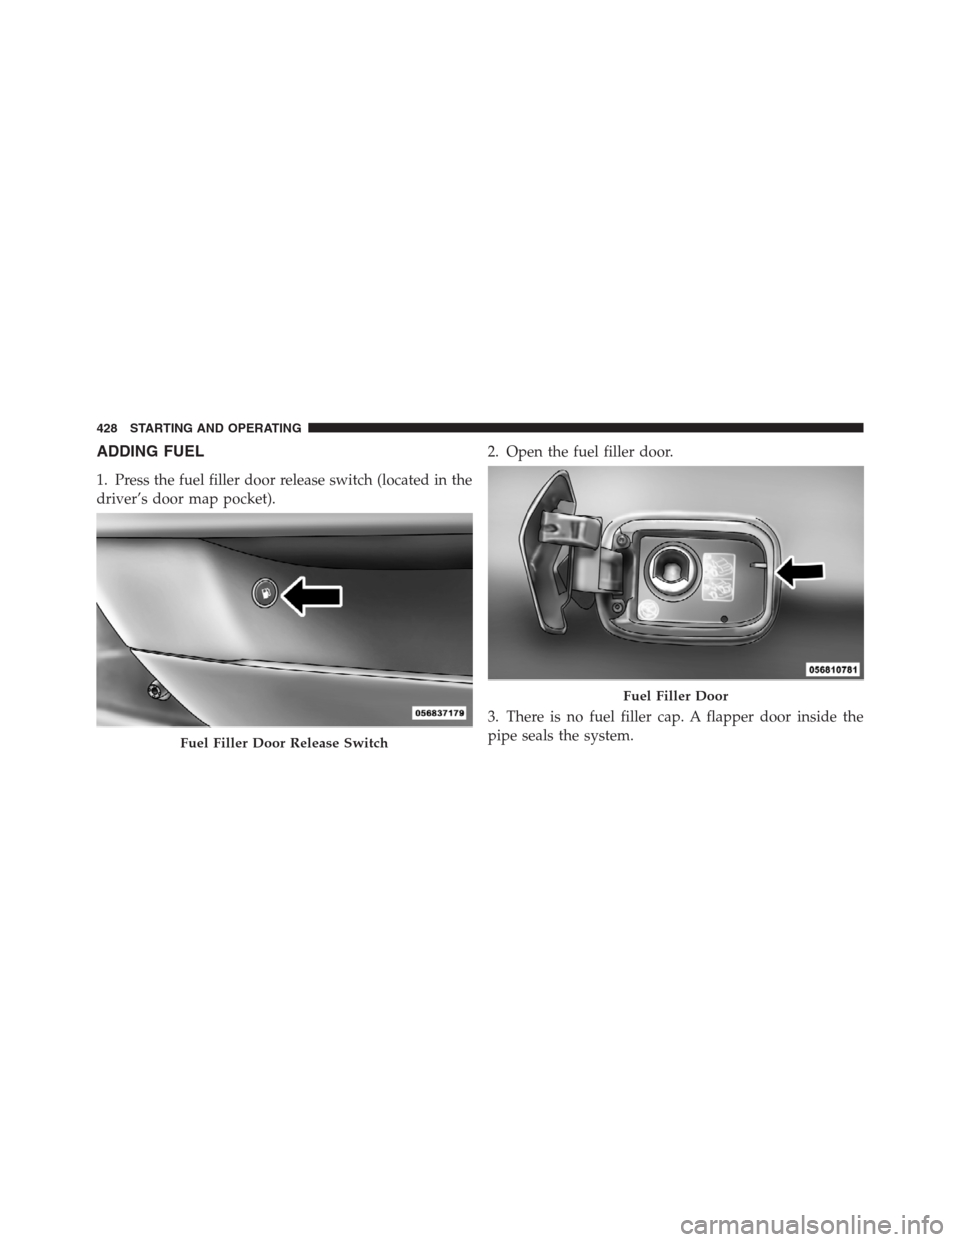 CHRYSLER 300 2012 2.G Owners Manual ADDING FUEL
1. Press the fuel filler door release switch (located in the
driver’s door map pocket).2. Open the fuel filler door.
3. There is no fuel filler cap. A flapper door inside the
pipe seals 